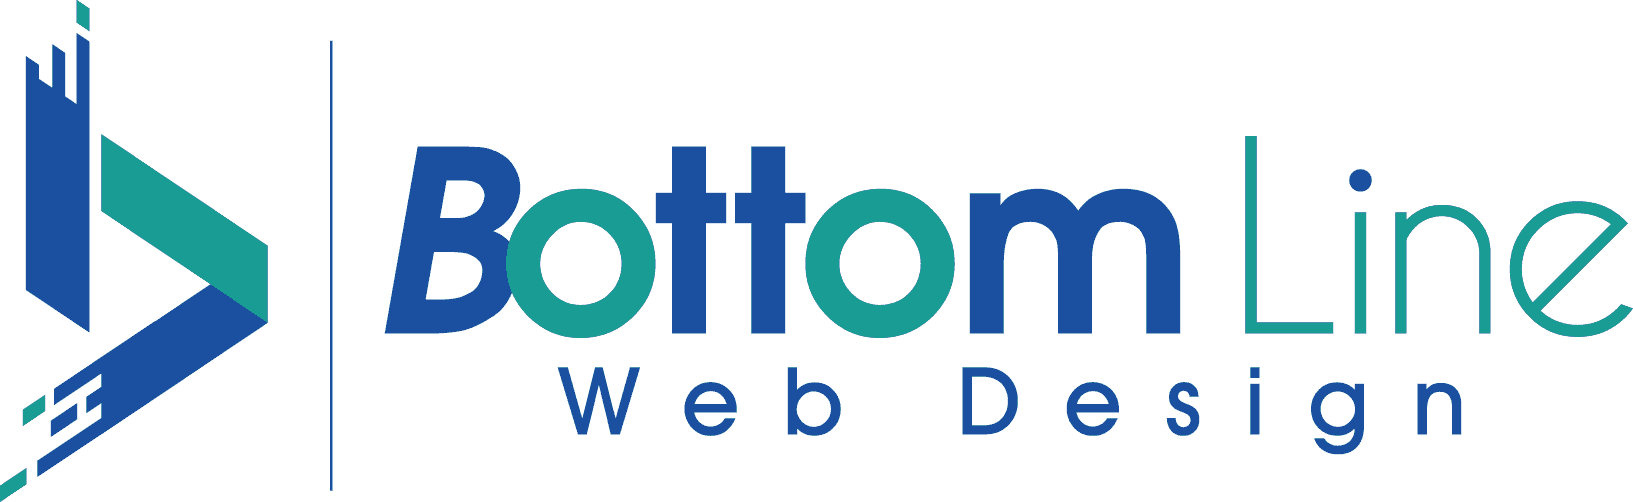 Newly Revamped Services Launched by Bottom Line Web Design